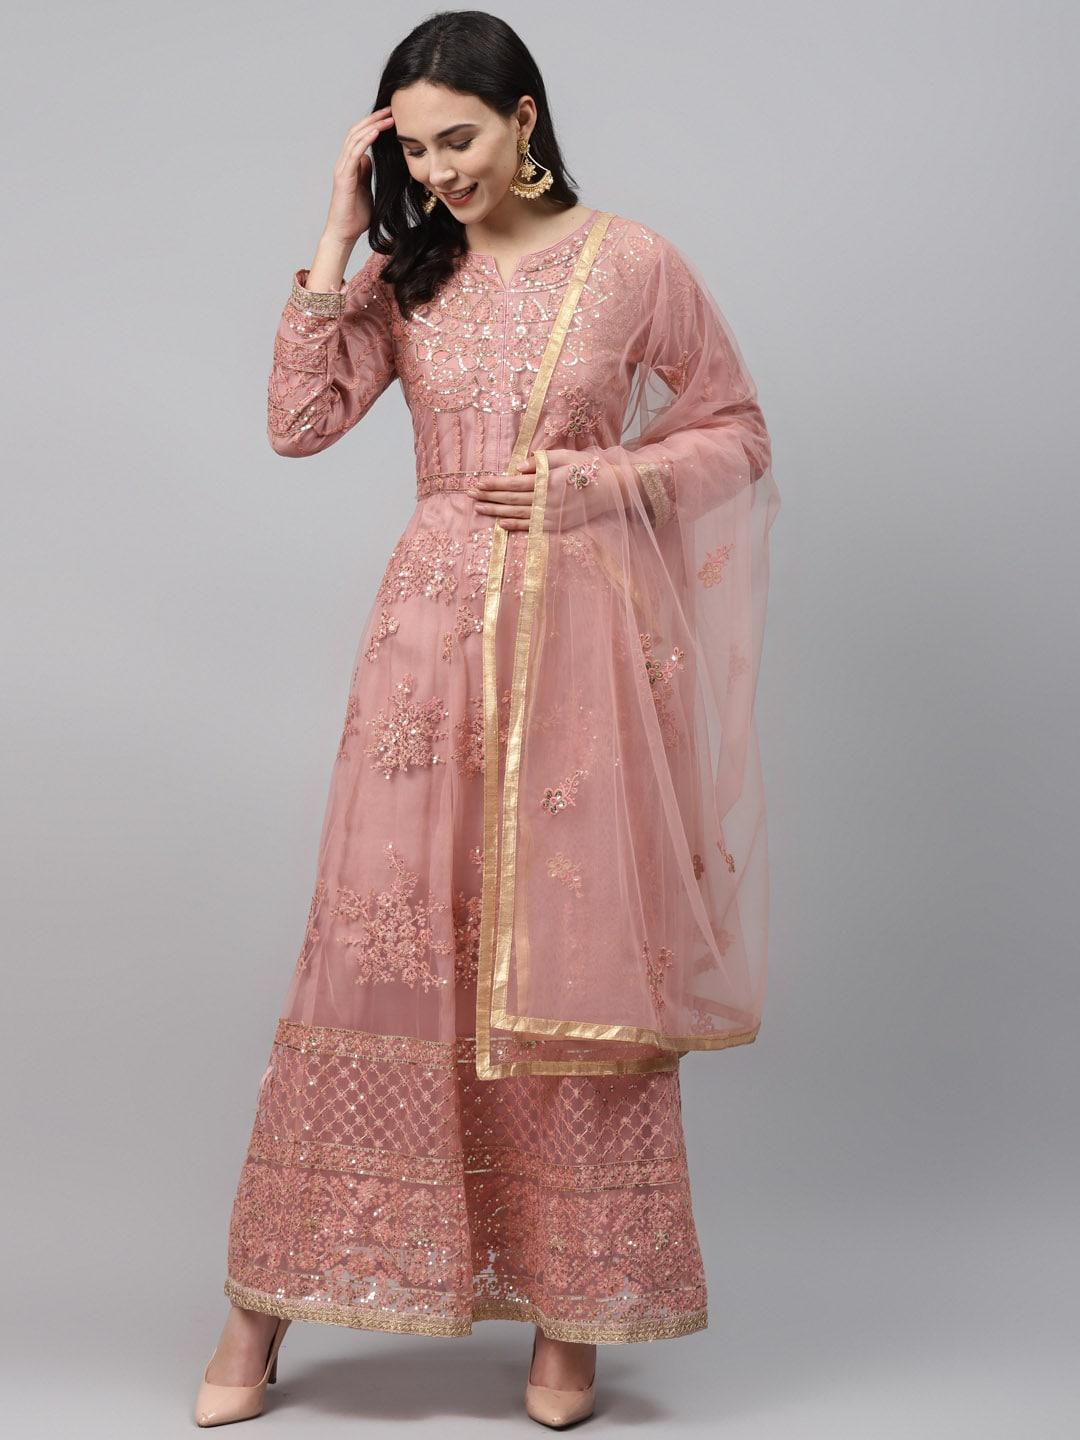 Readiprint Fashions Peach-Coloured & Golden Net Semi-Stitched Dress Material